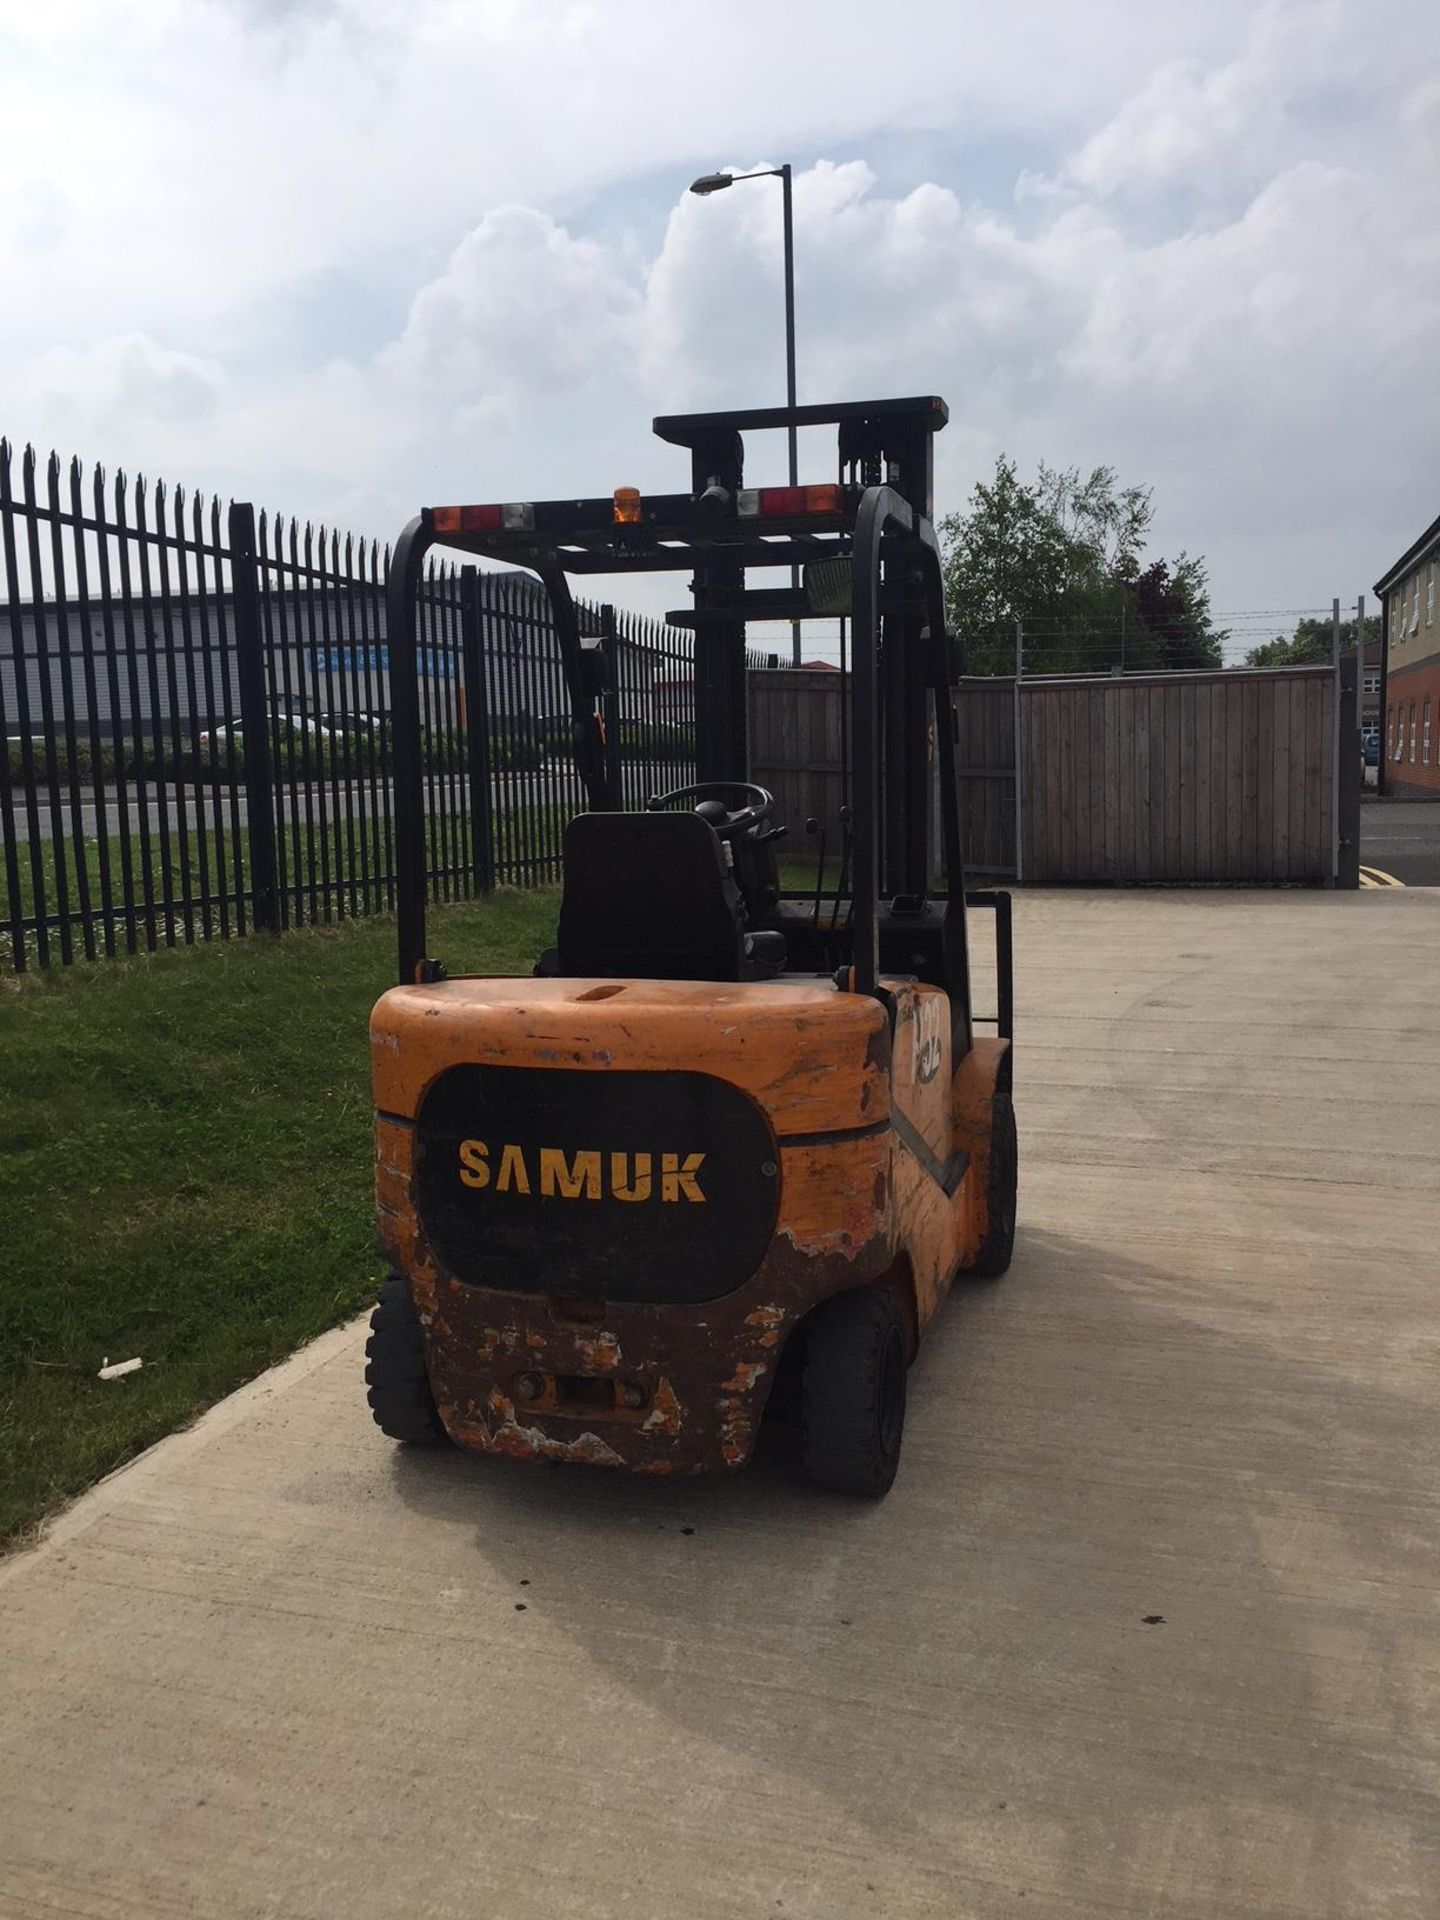 Sam-uk electric counterbalance fork lift truck - Image 3 of 10